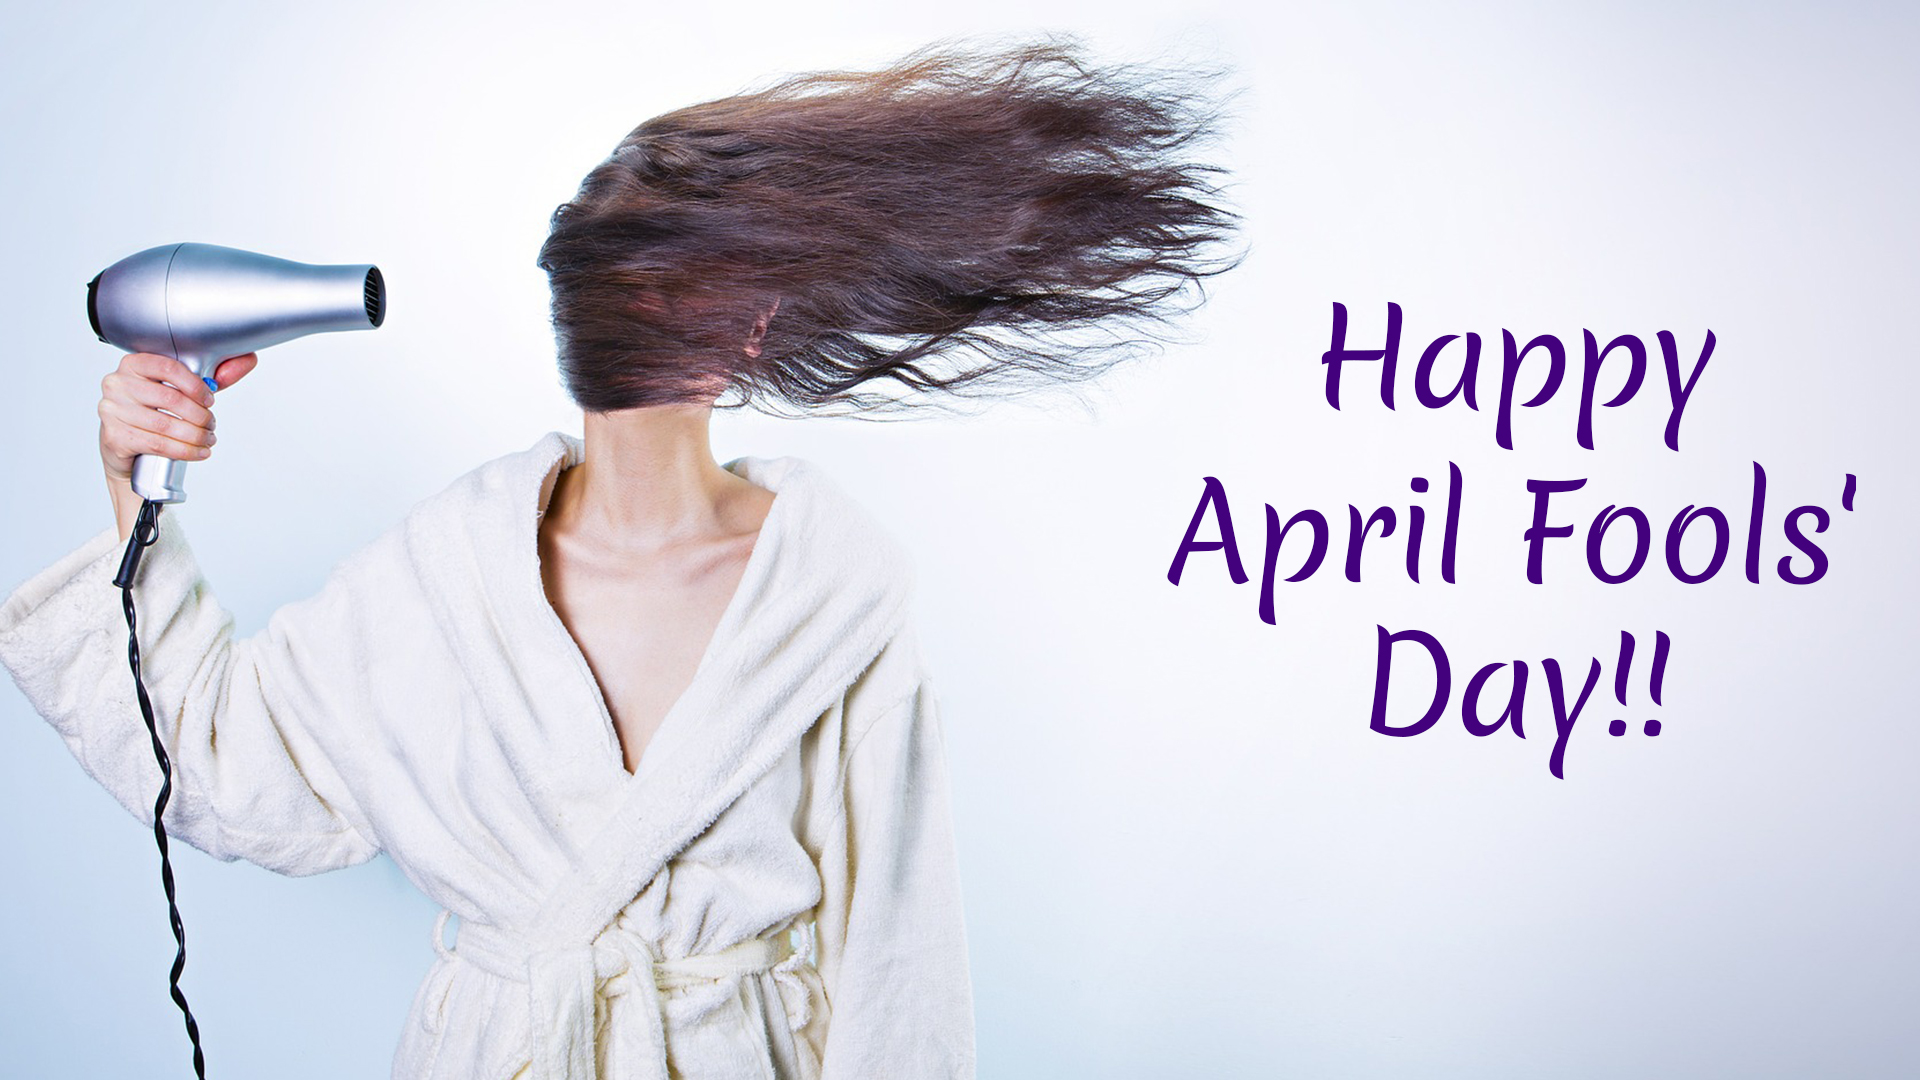 April Fools' Day Images & Funny Jokes Download for Free Online: Best  WhatsApp Stickers, New Prank GIF Videos to Wish Happy April Fools' Day  2019! | 🙏🏻 LatestLY